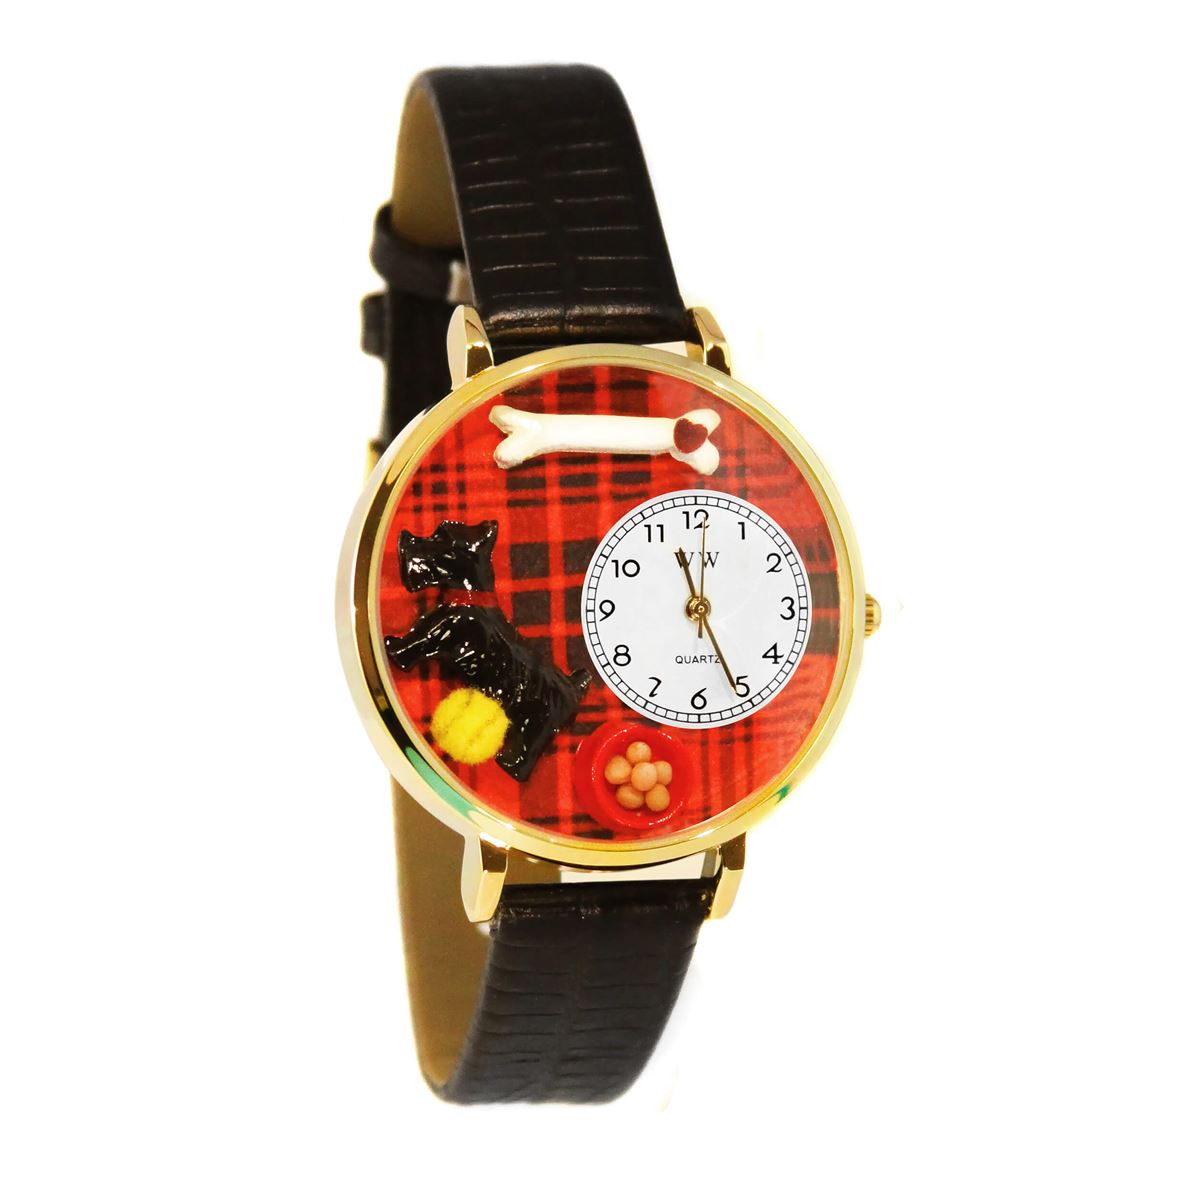 Whimsical Gifts | Scottie 3D Watch Large Style | Handmade in USA | Animal Lover | Dog Lover | Novelty Unique Fun Miniatures Gift | Gold Finish Black Leather Watch Band